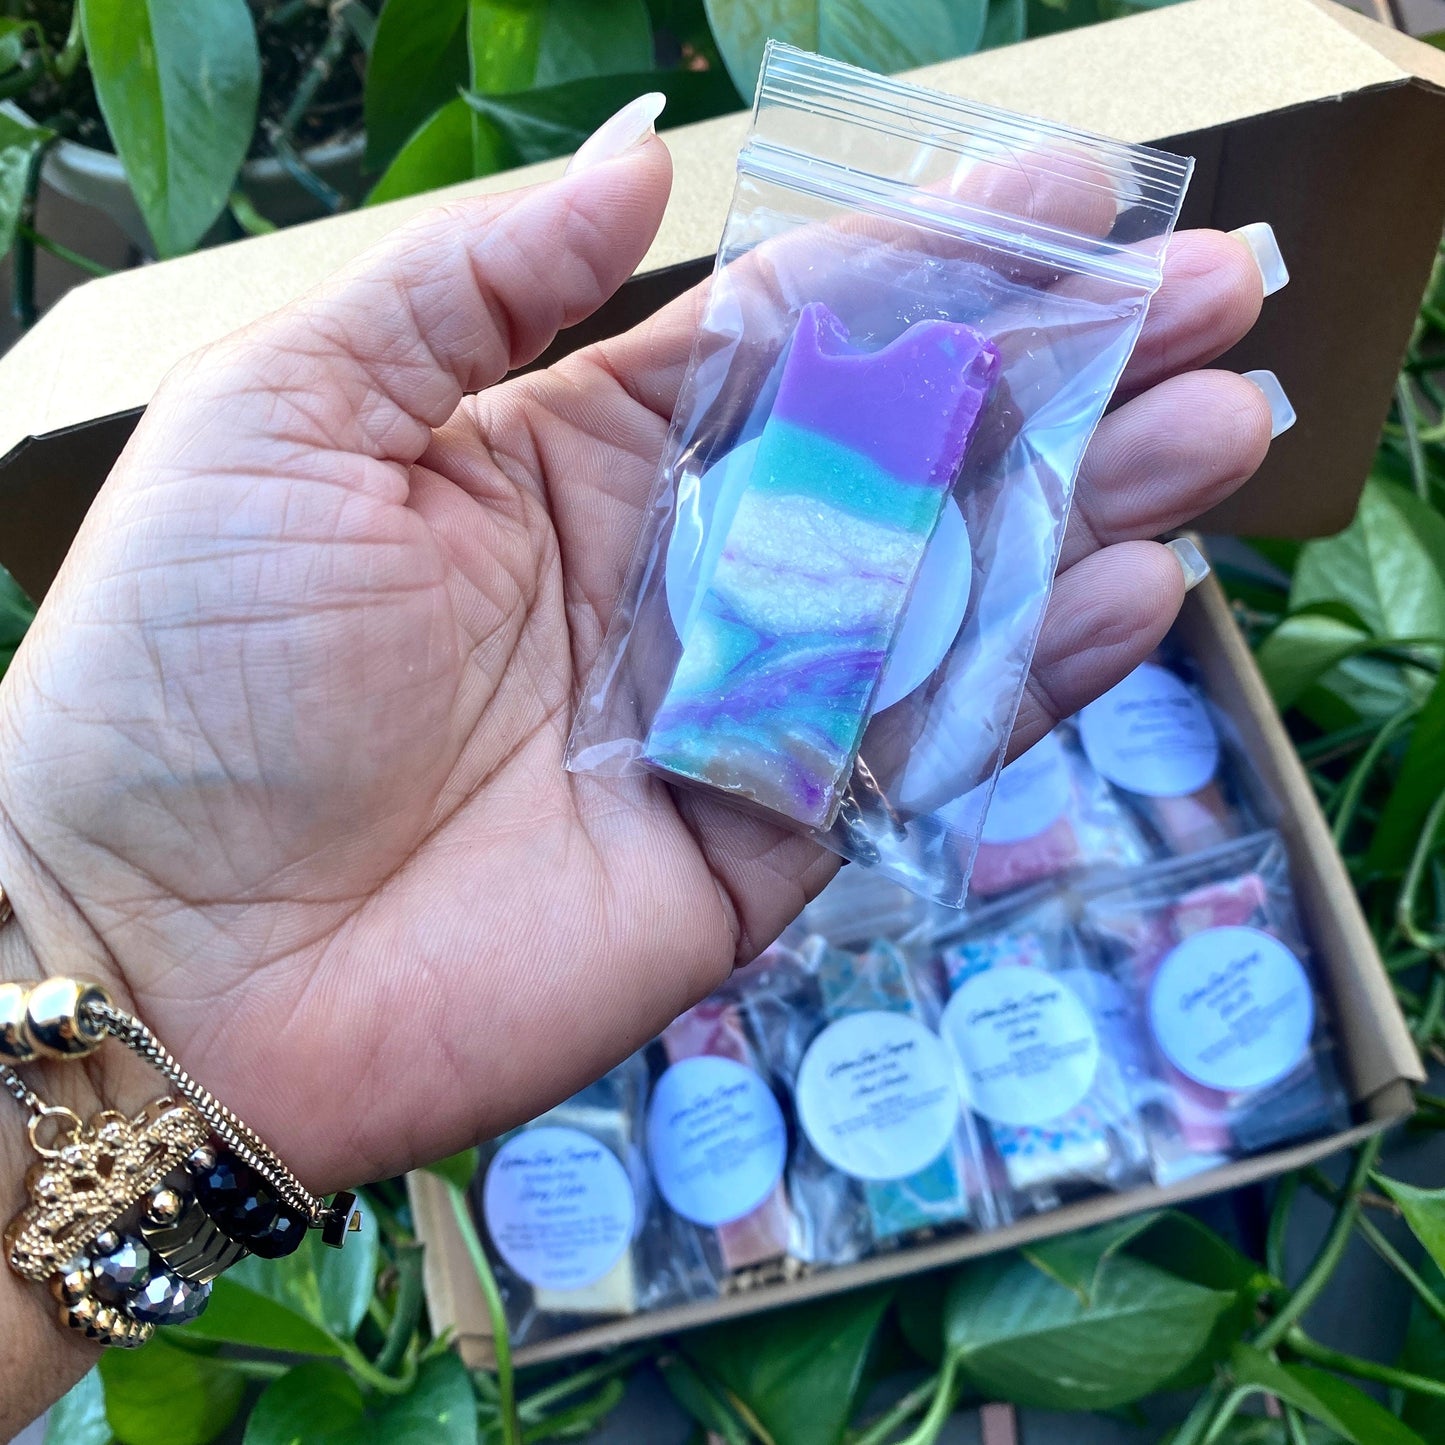 Gotham Soap Company Holding Soap Sample in Hand